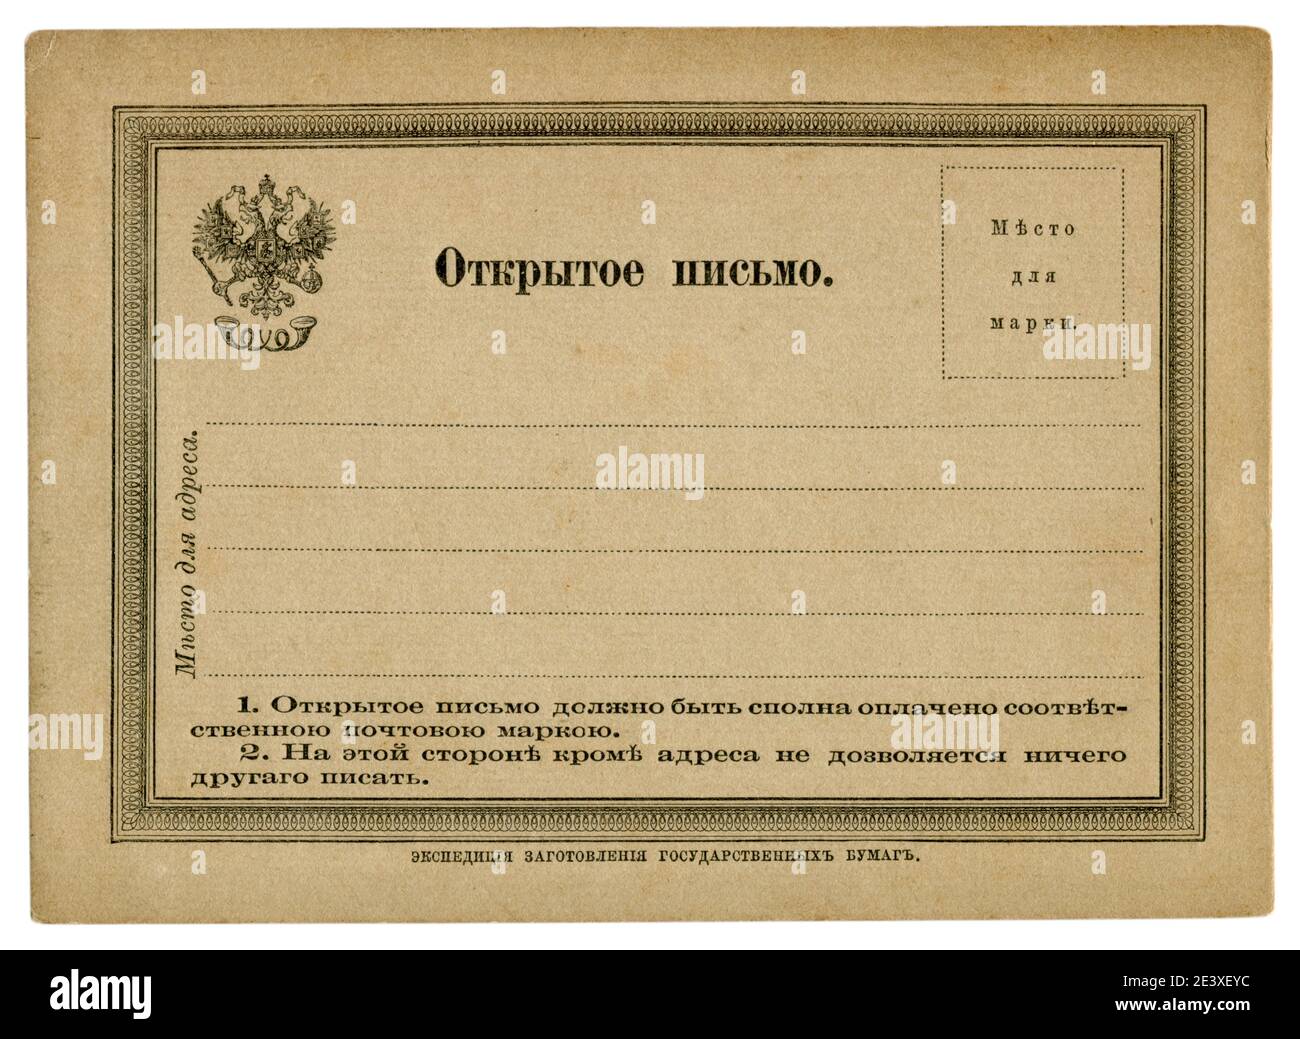 Unused russian historical postal stationary card with double-headed eagle, with space for a postage stamp, Russian Empire, the first issue, 1872 Stock Photo